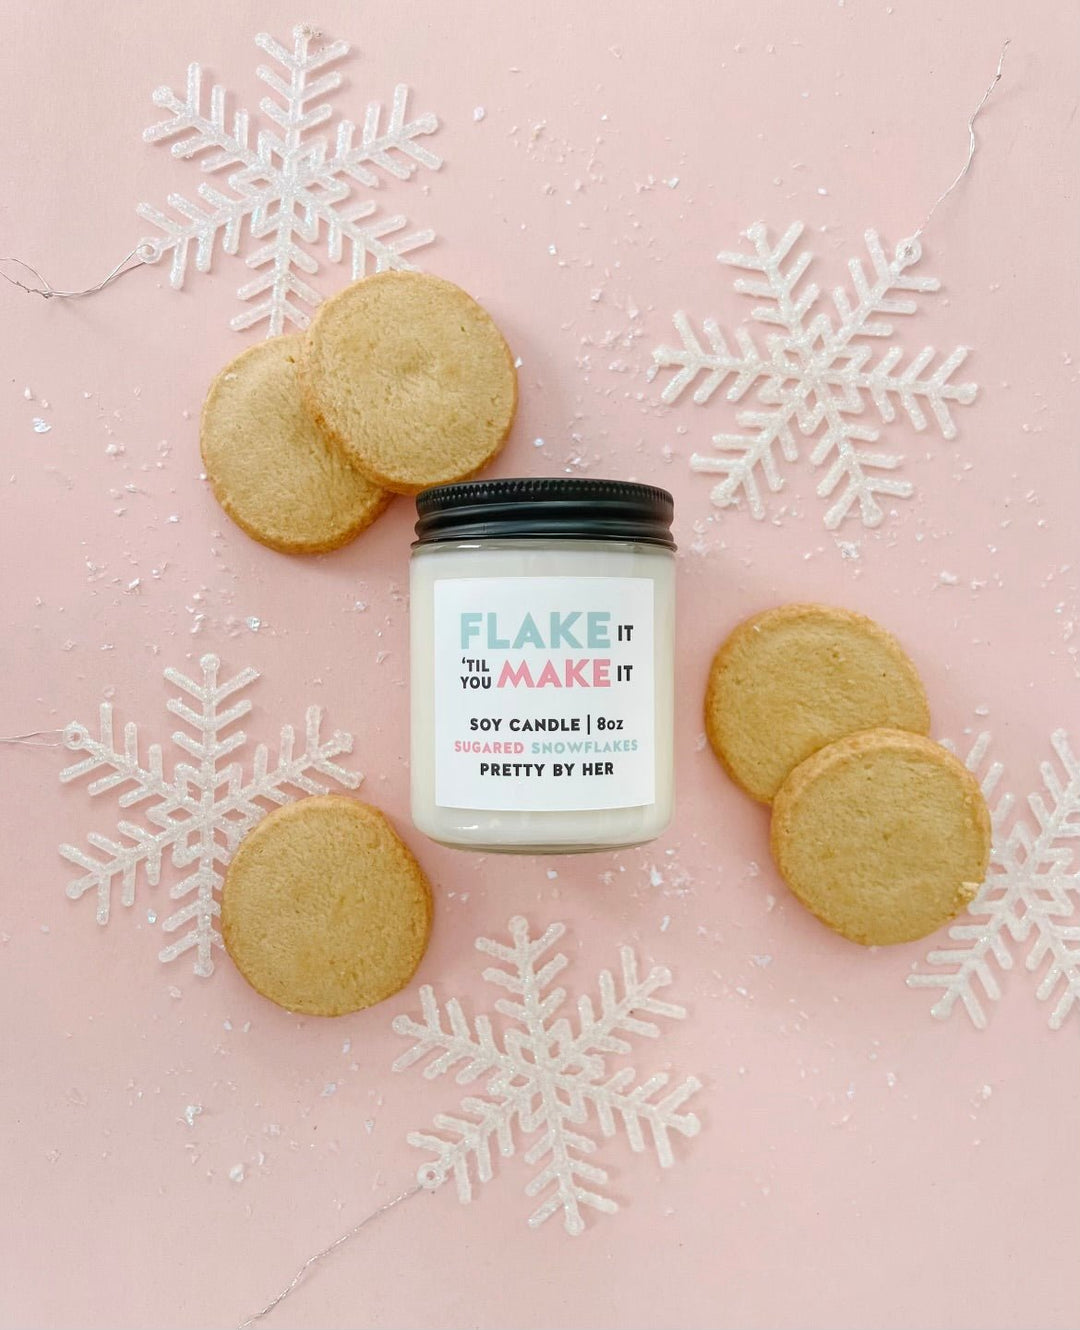 Flake It Til' You Make It | Soy Wax Candle - Pretty by Her- handmade locally in Cambridge, Ontario